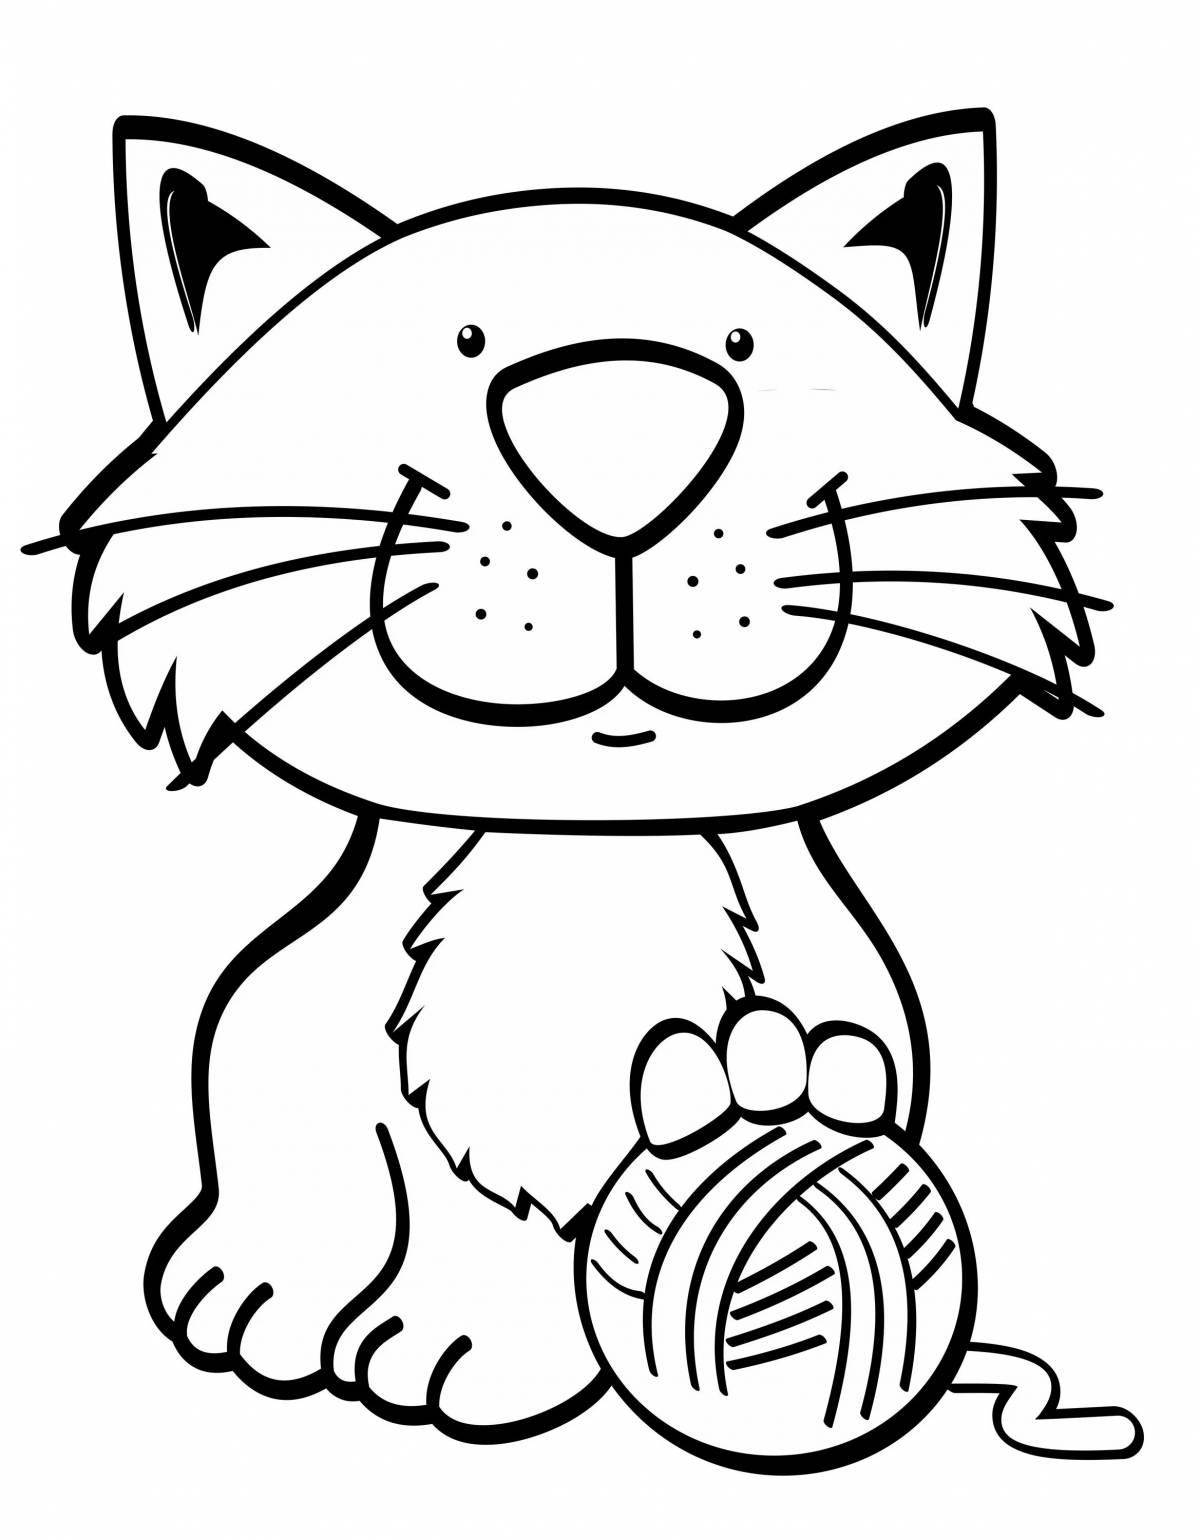 Coloring page adorable kitten bw